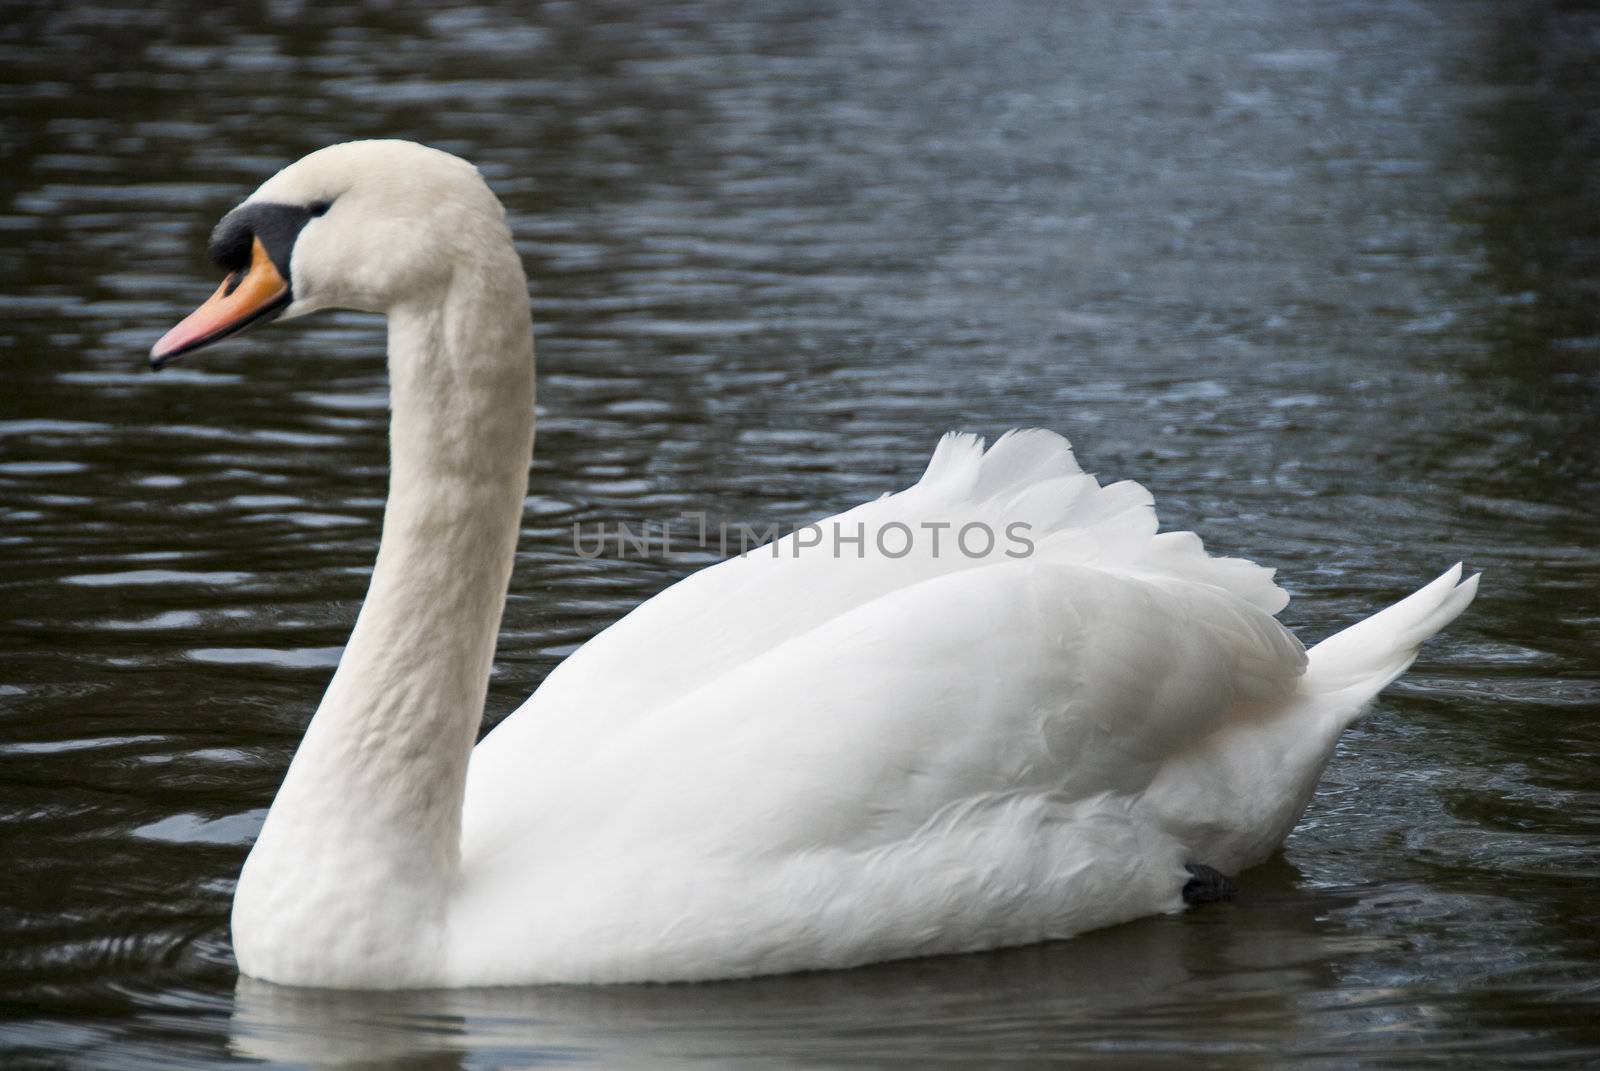 A white solitaire swan swimming in a Dublin Lake